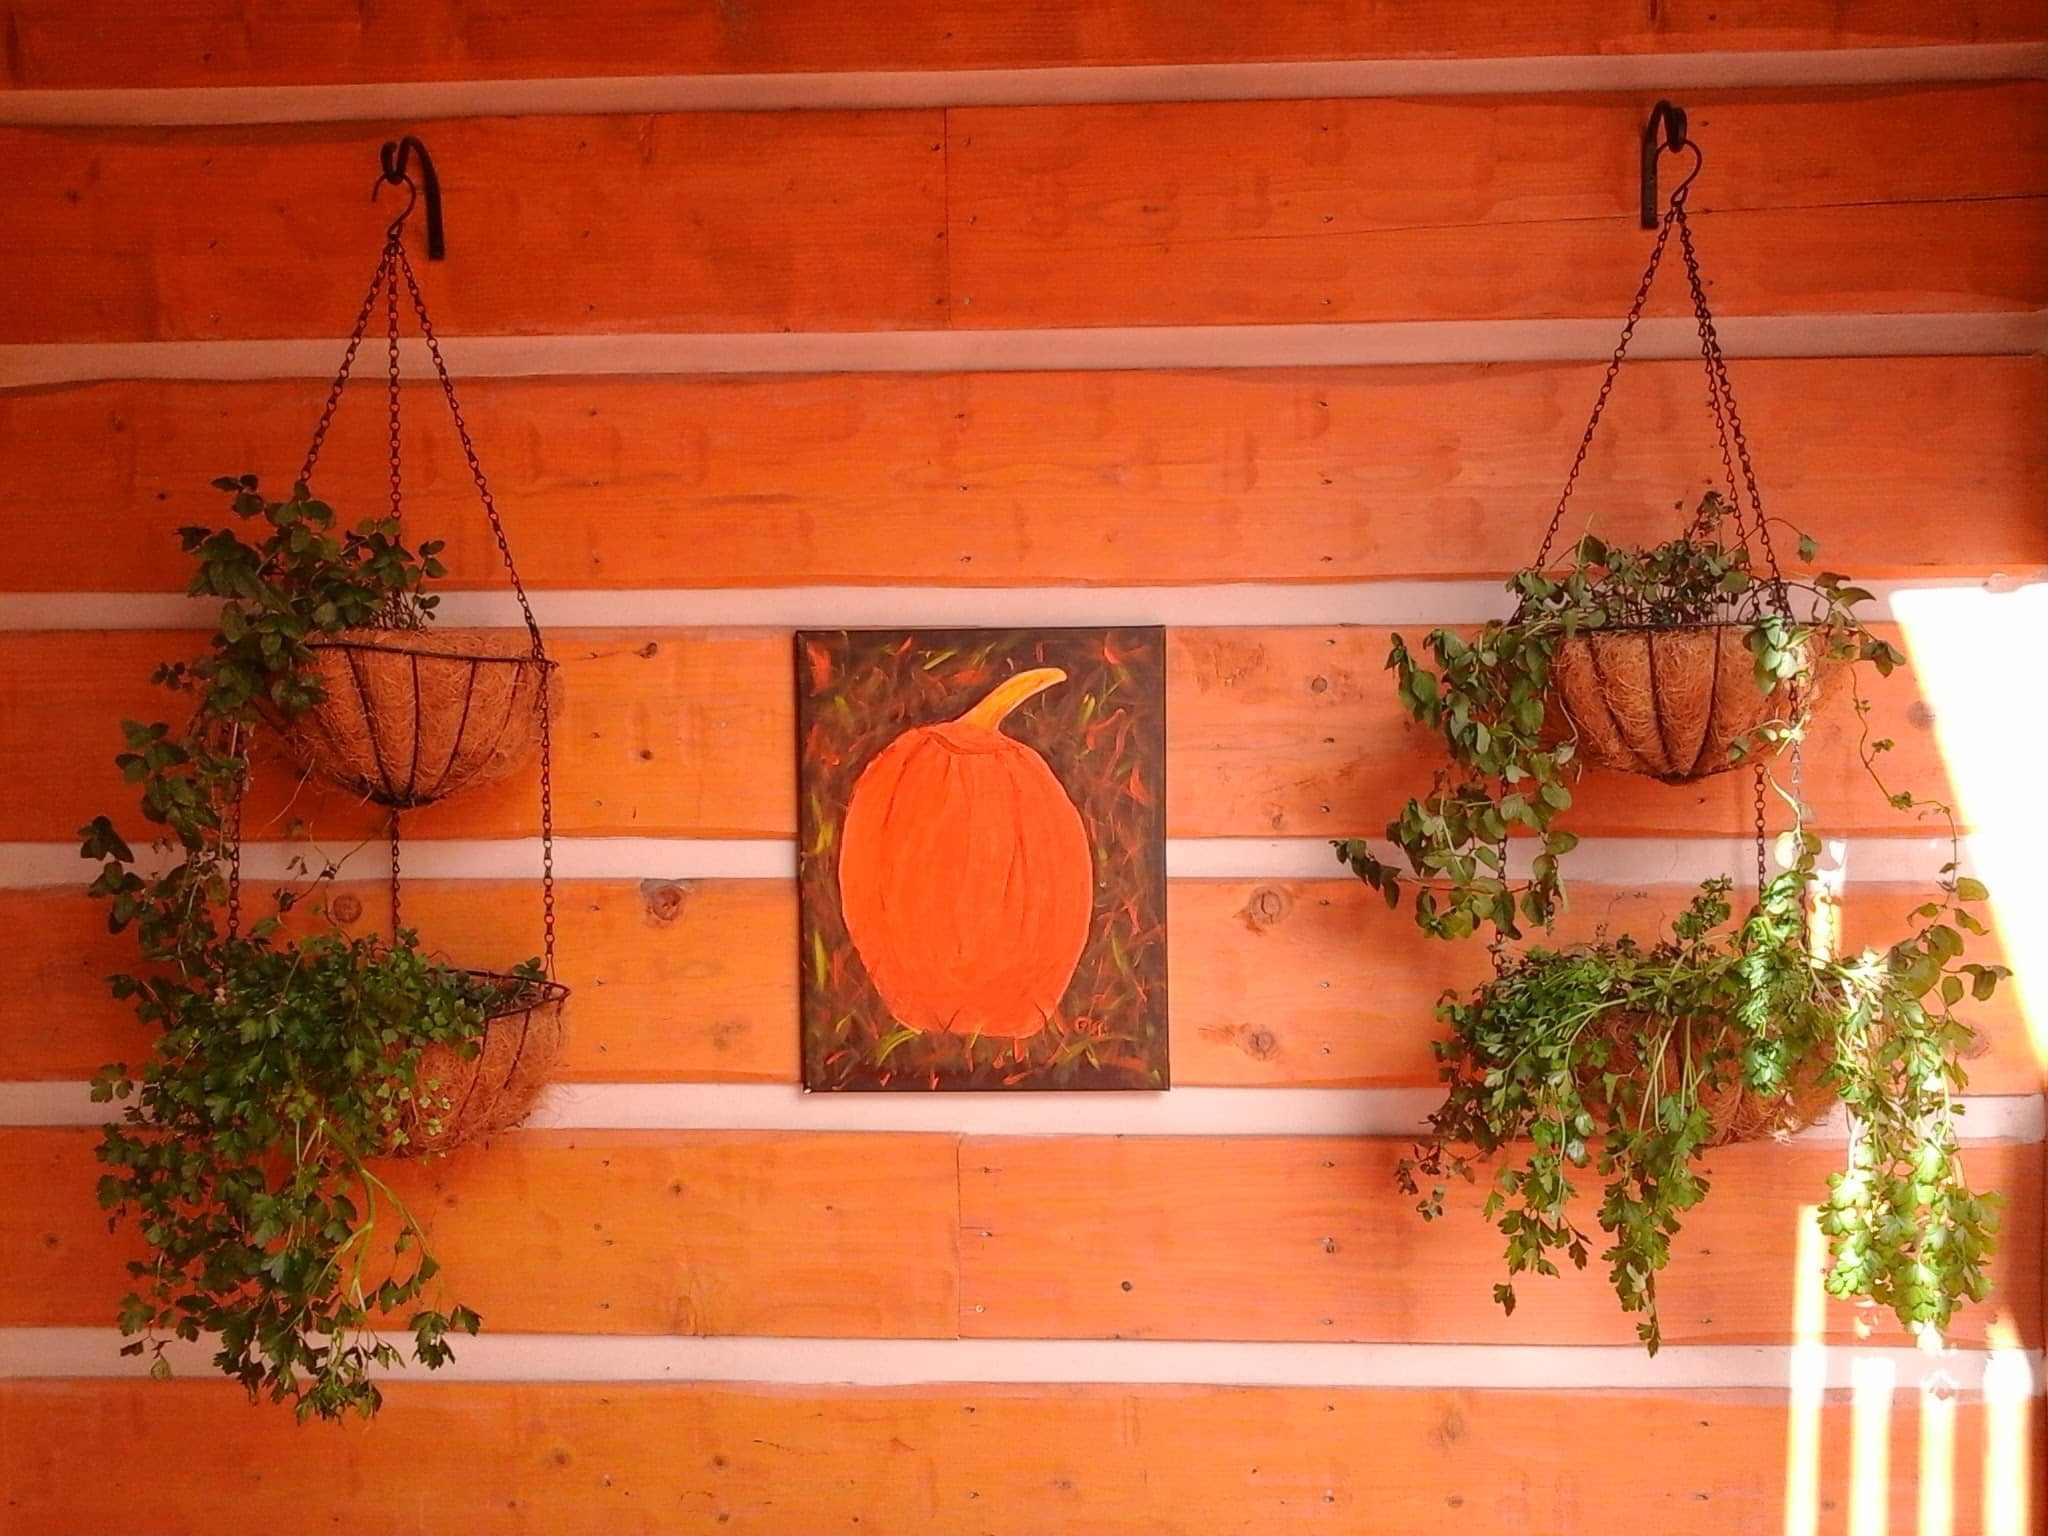 Covered entrance to condos with 2 baskets of herbs growing over the edge with a pumpkin fall sign hanging in the middle.